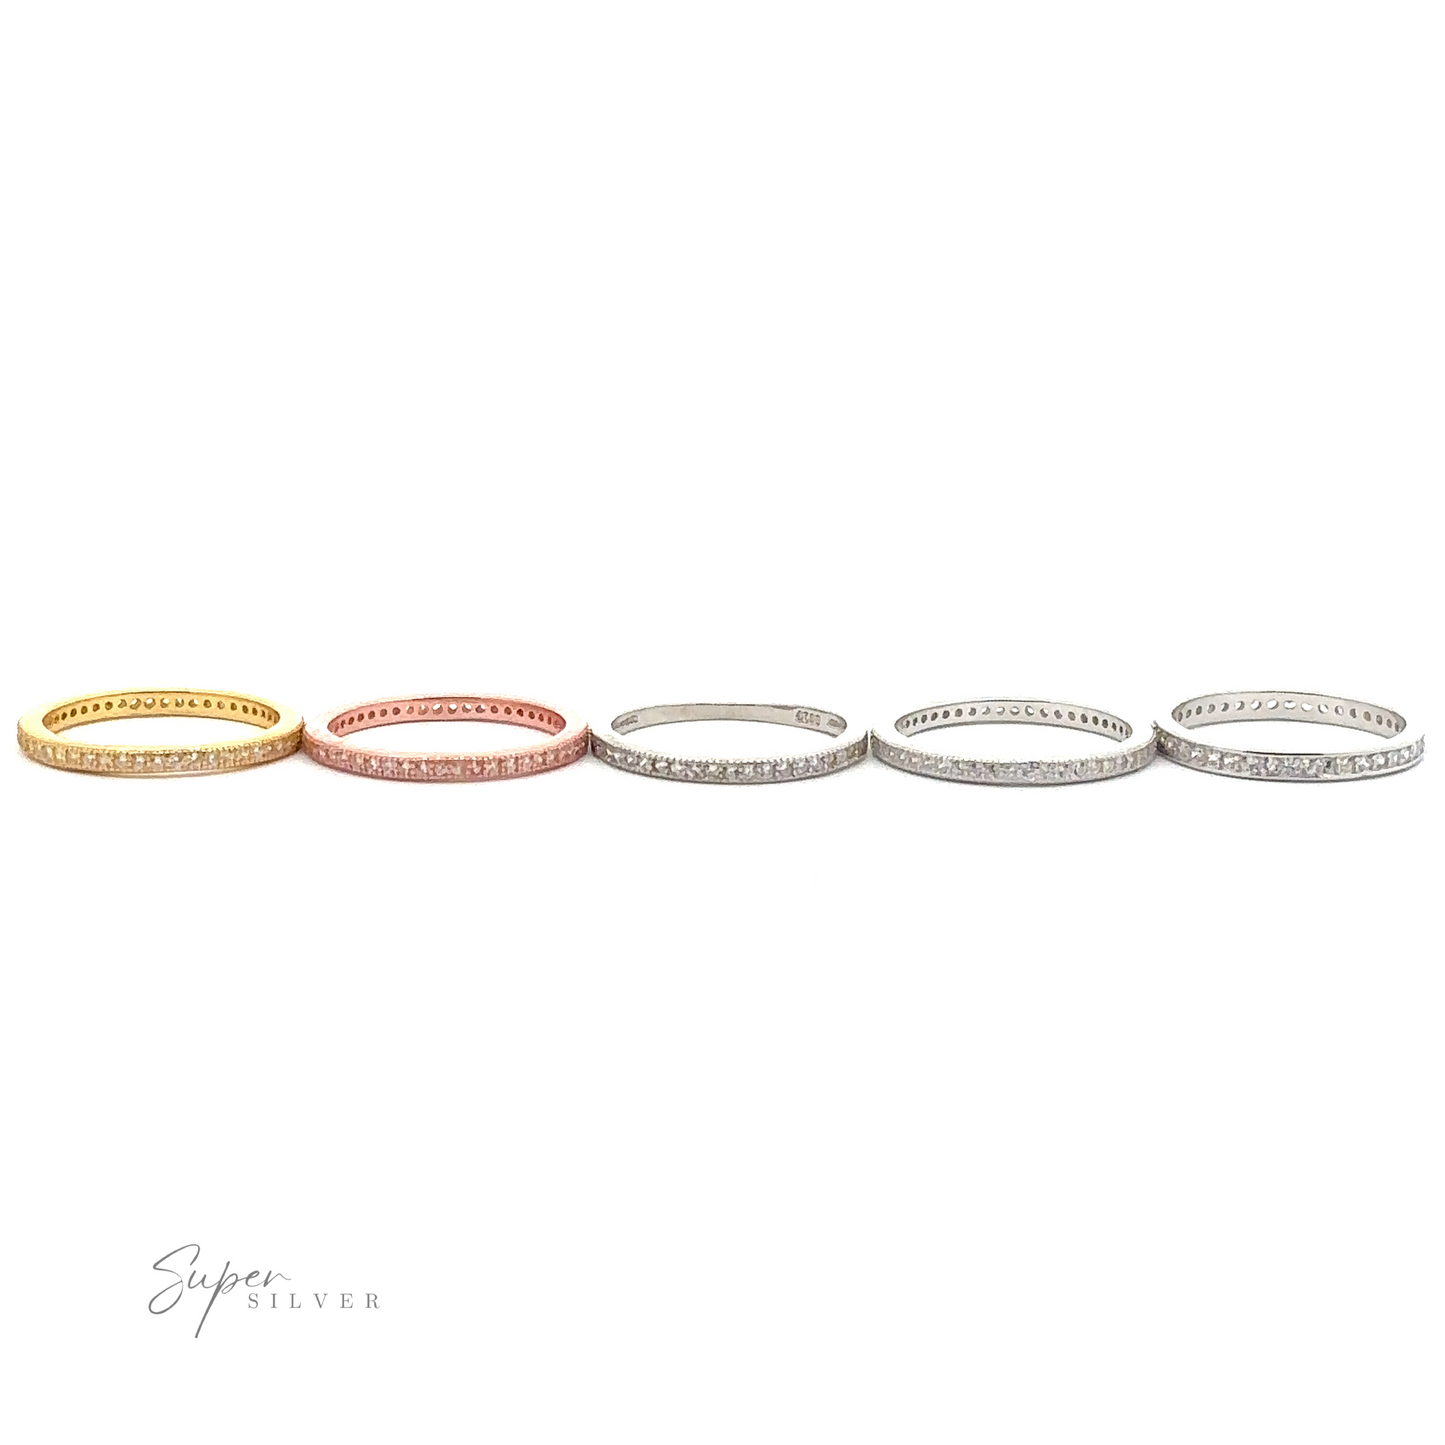 
                  
                    Five thin, metal bracelets in various shades (gold, rose gold, and sterling silver) with embedded small gemstones, displayed in a row against a white background. The logo "Classic Pave Cubic Zirconia Eternity Ring" is at the bottom left.
                  
                